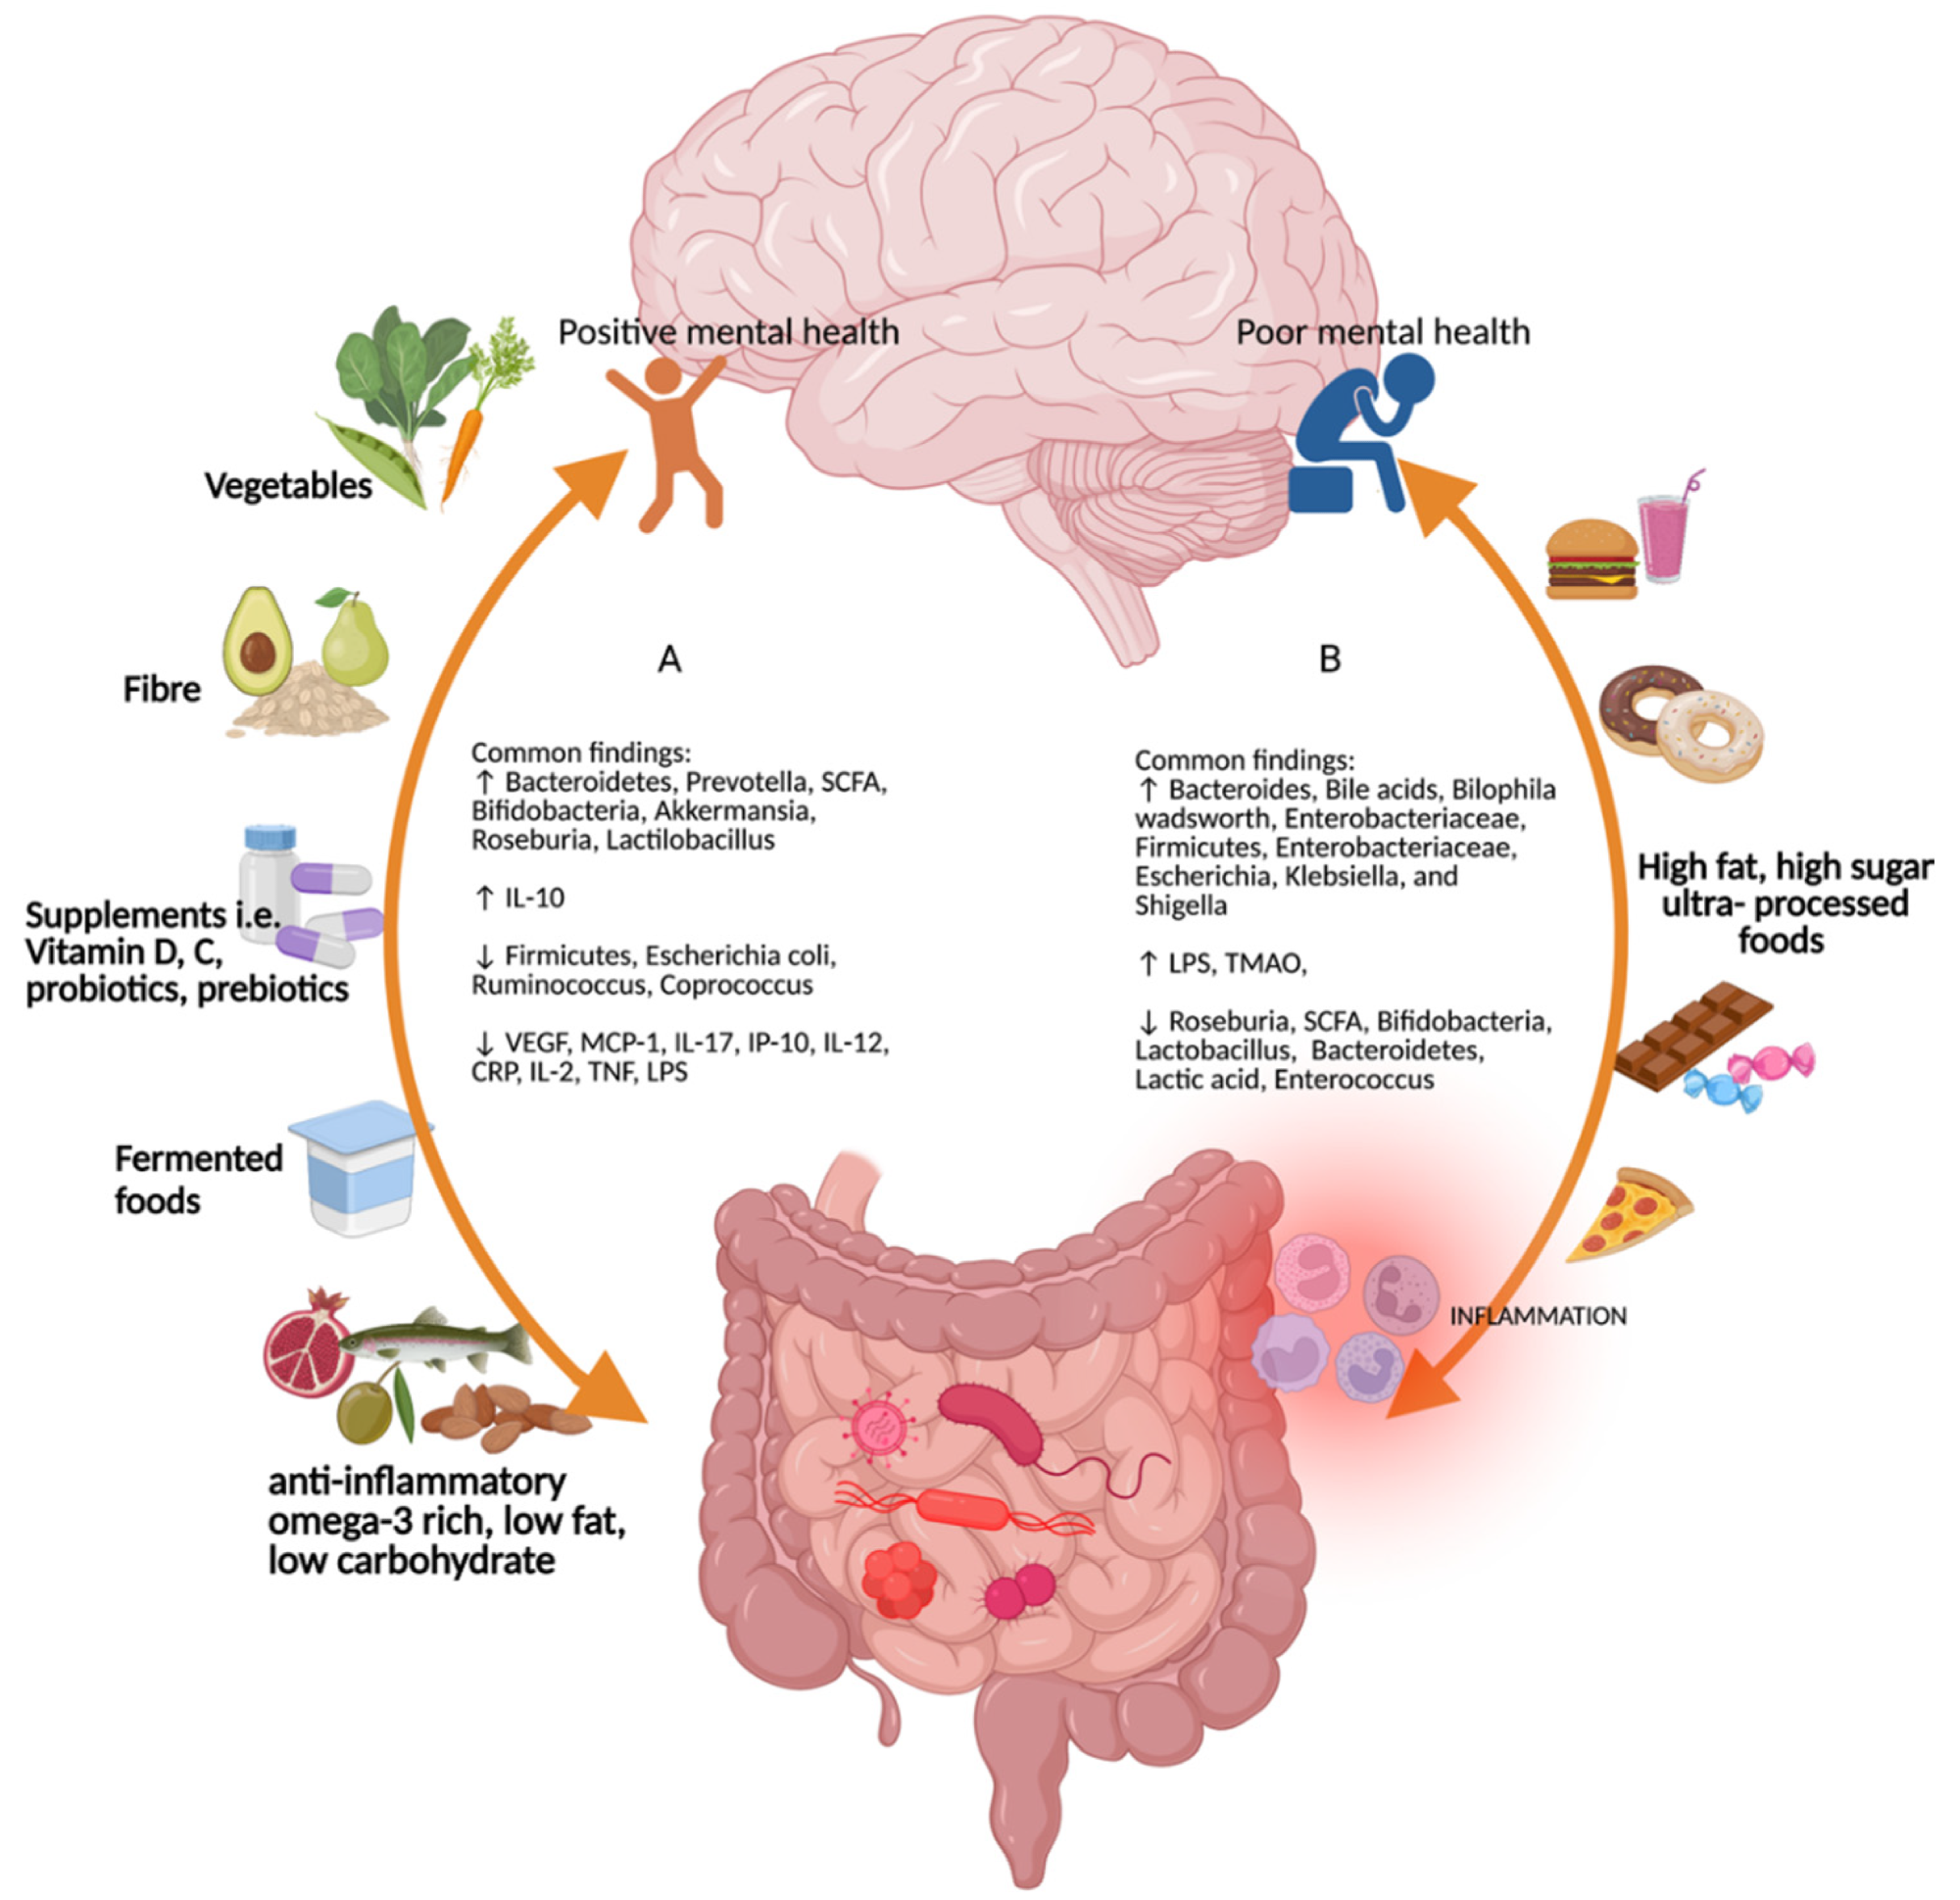 Common findings of different types of diet on the gut-brain axis and microbiome.  (a) Diets rich in vegetables, fiber and micronutrients such as vitamins D and C, probiotics, prebiotics, fermented and anti-inflammatory foods rich in omega-3, low in fat and low in carbohydrates promote positive mental health and increase in Bacteroidetes, Prevotella, short chain fatty acids, Bifodobacteria, Akkermansia, Roseburia, Lactilobacillus, and interleukin (IL)-10, is decreased in Firmicutes, Escherichia coli, Ruminococcus, Coprococcus, vascular endothelial growth factor, and monocytes.  Gamma-induced protein 10, IL-17, IL-12, c-reactive protein, IL-2, tumor necrosis factor, and lipopolysaccharide.  (b) Foods high in fat, sugar and ultra-processing increase bacteria, bile acids, pylori, wadsworth, enterobacteriaceae, staphylococcus, escherichia, klebsiella and shigella.  Figure created with Biorender (Accessed April 29, 2022).